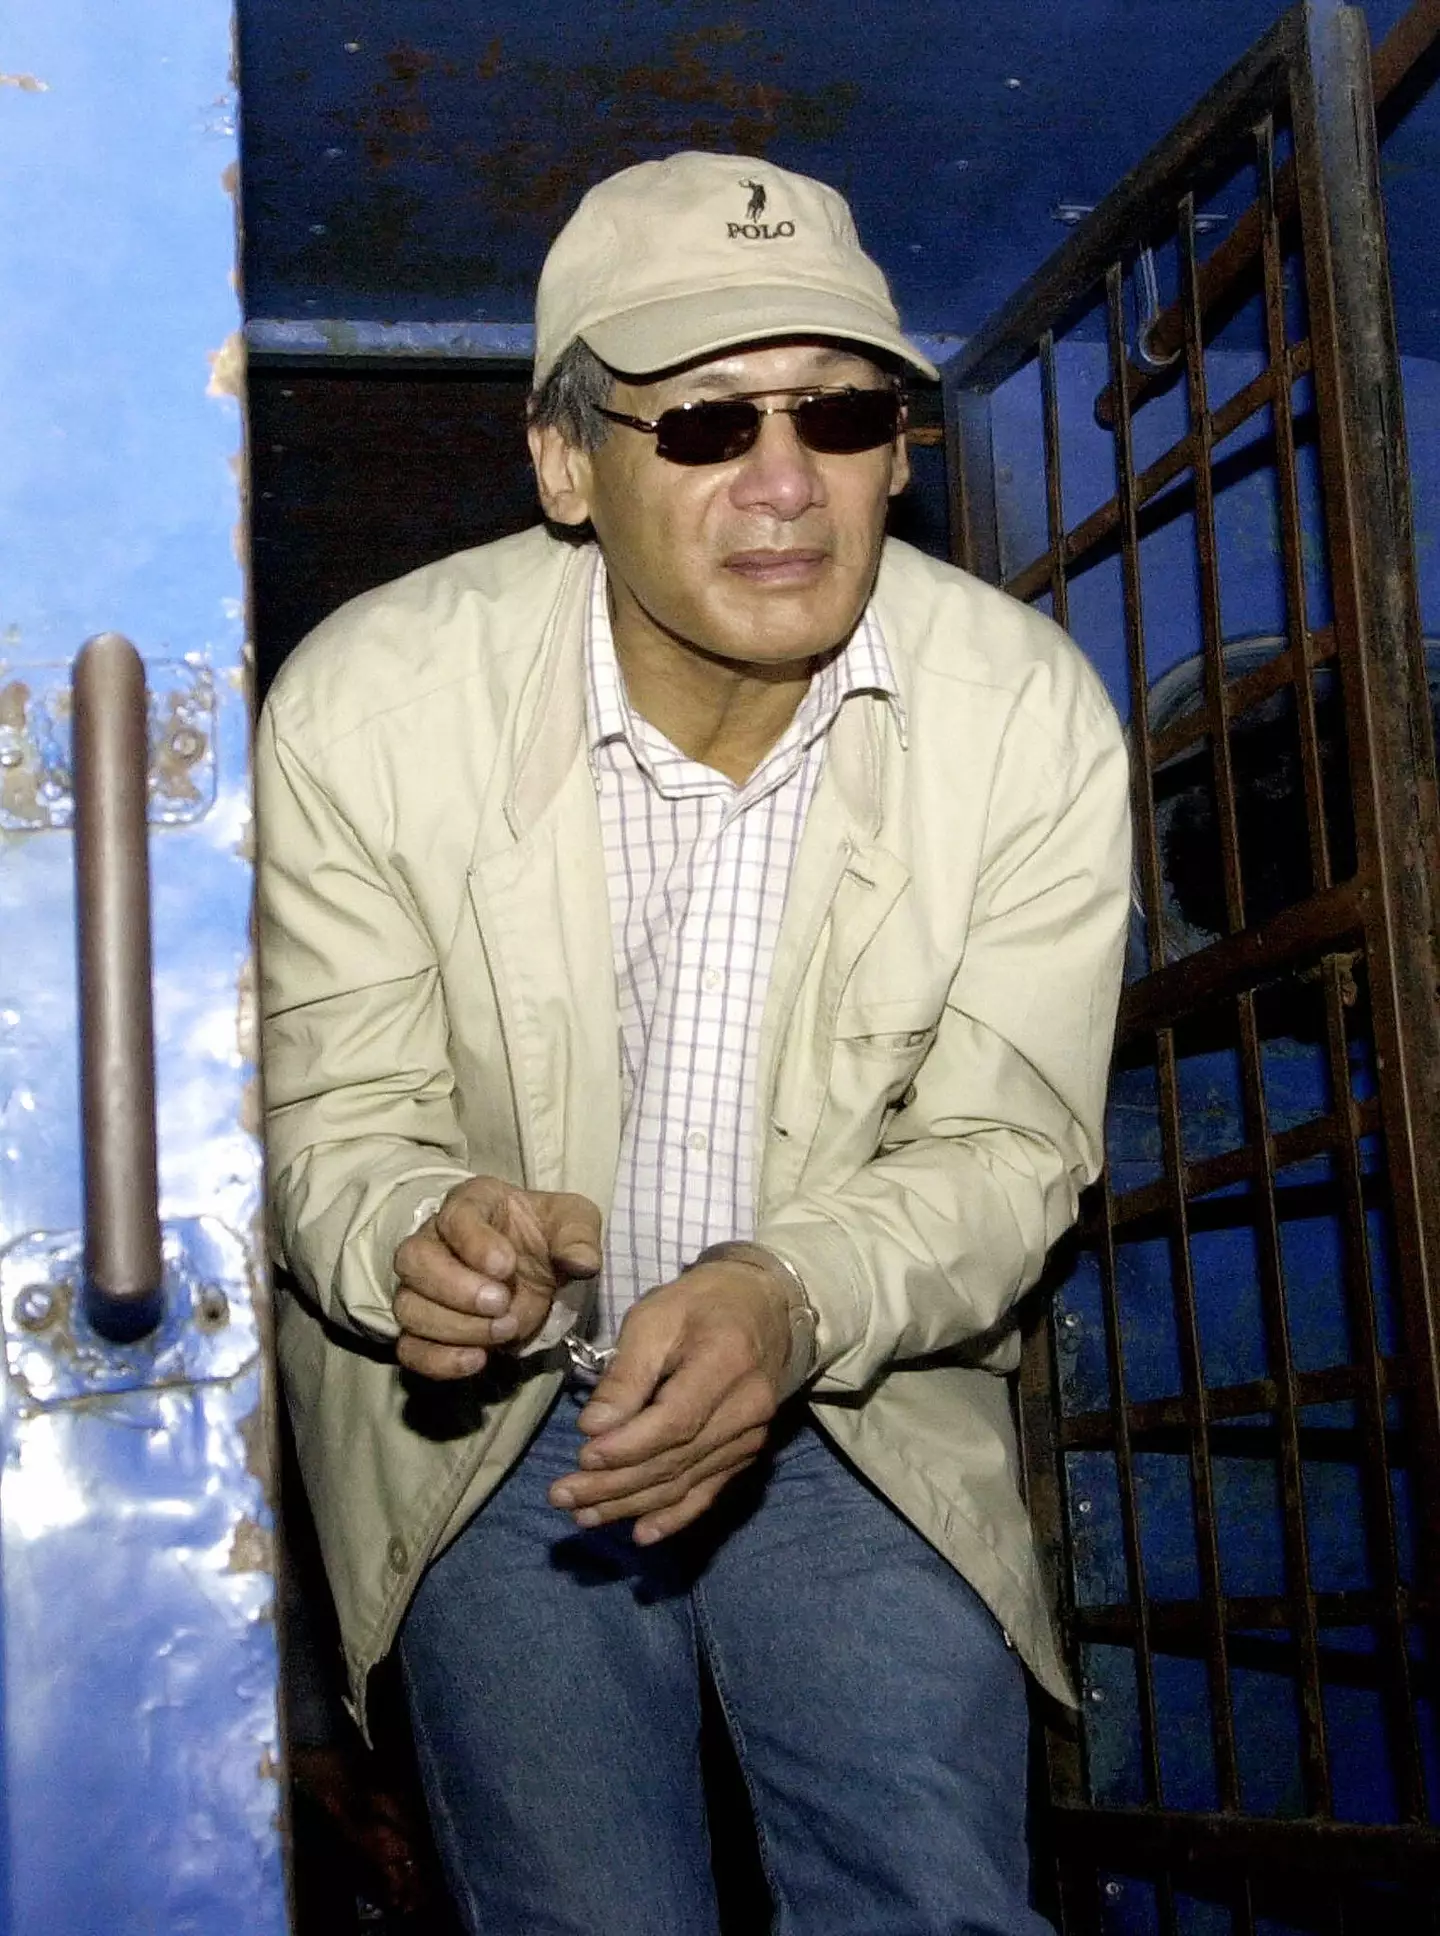 A new Channel 4 documentary will delve into the life and crimes of Charles Sobhraj, pictured here in 2003.